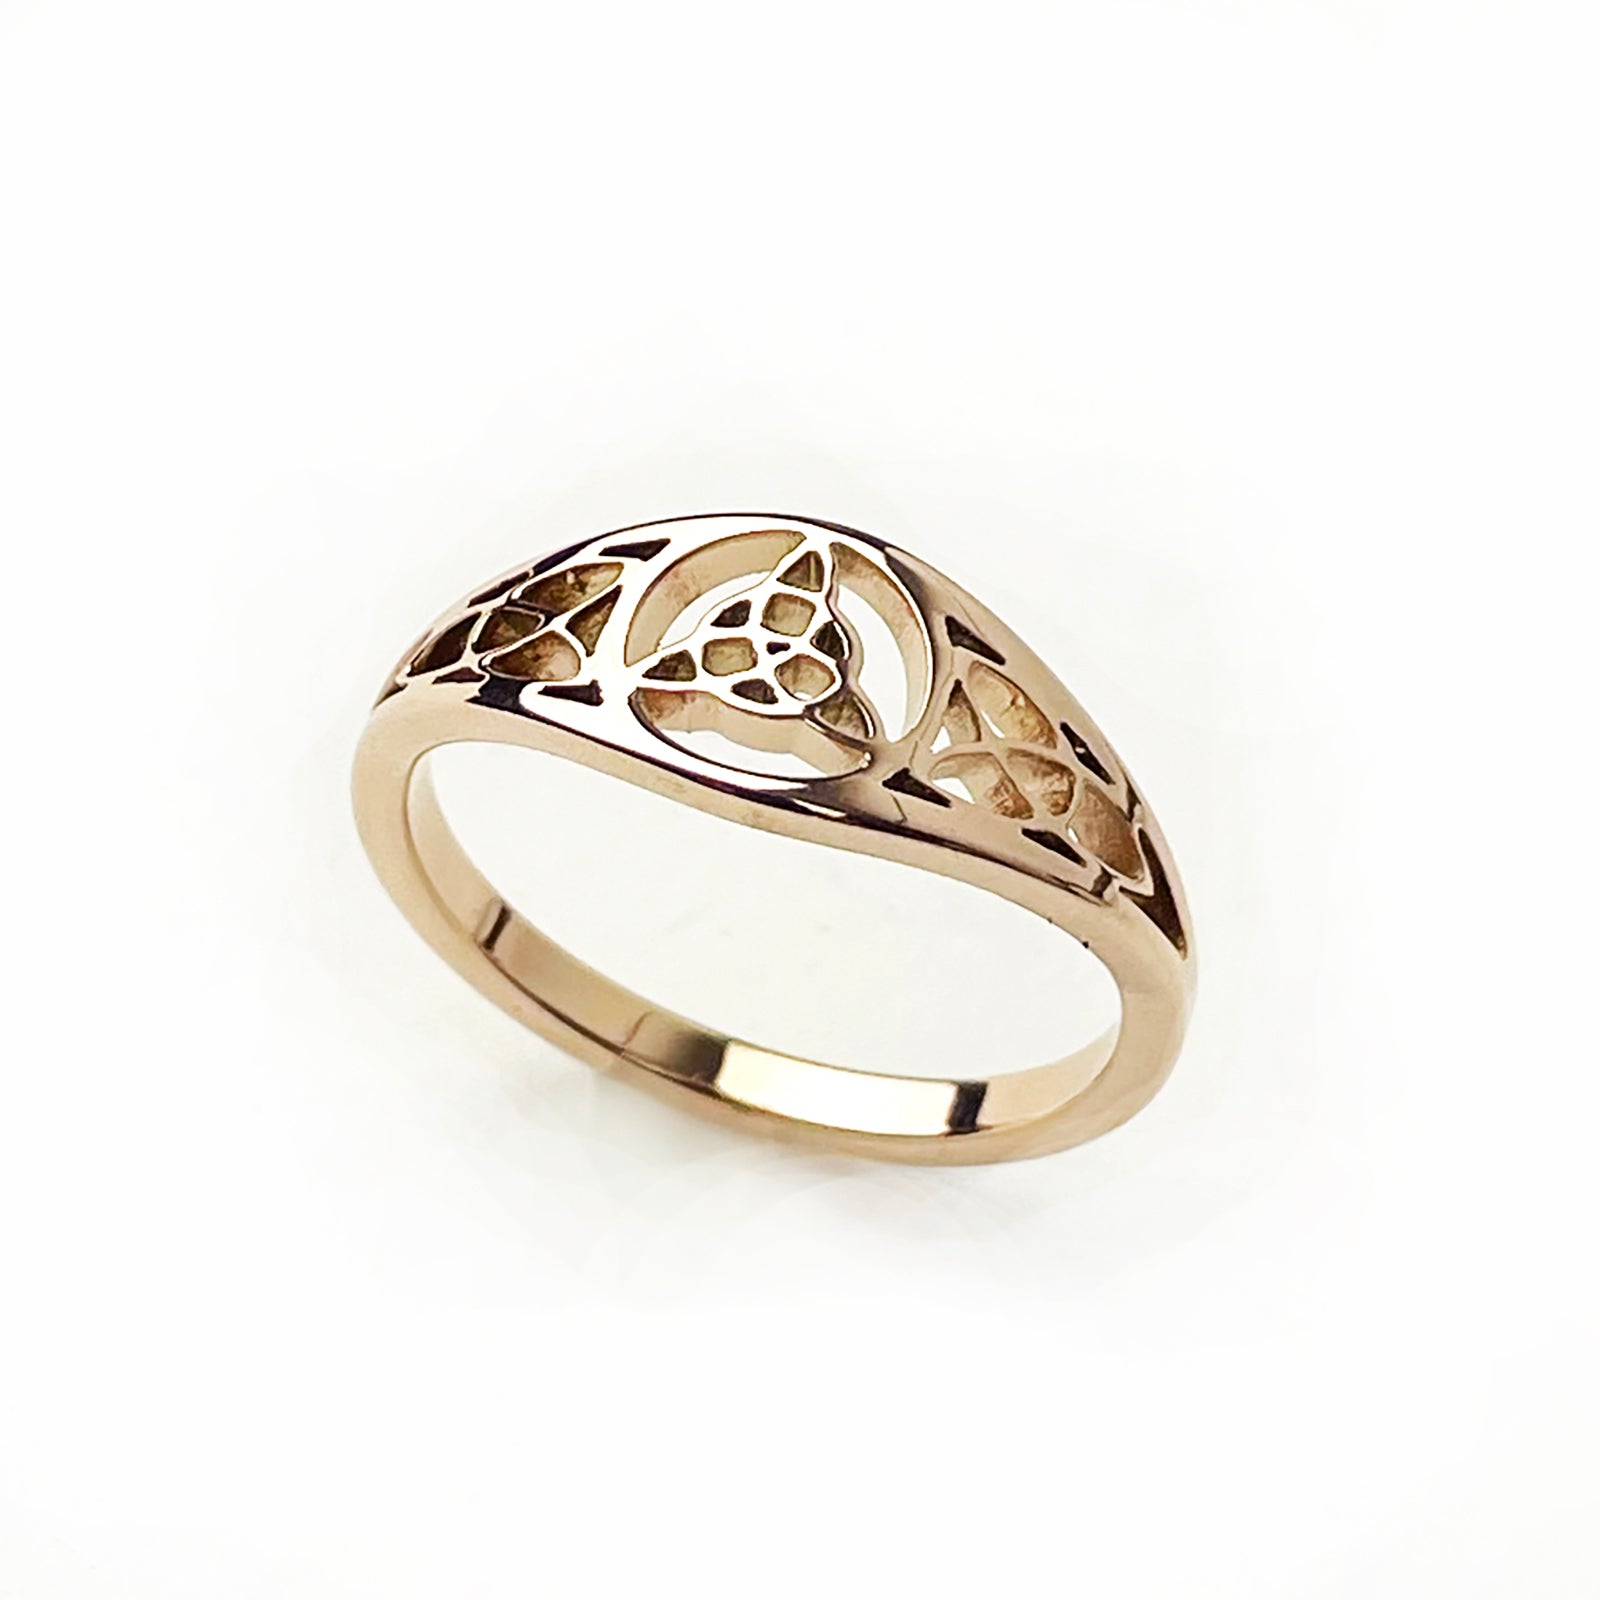 Woman's Fancy Trinity Knot Ring in Rose Gold Stainless Steel